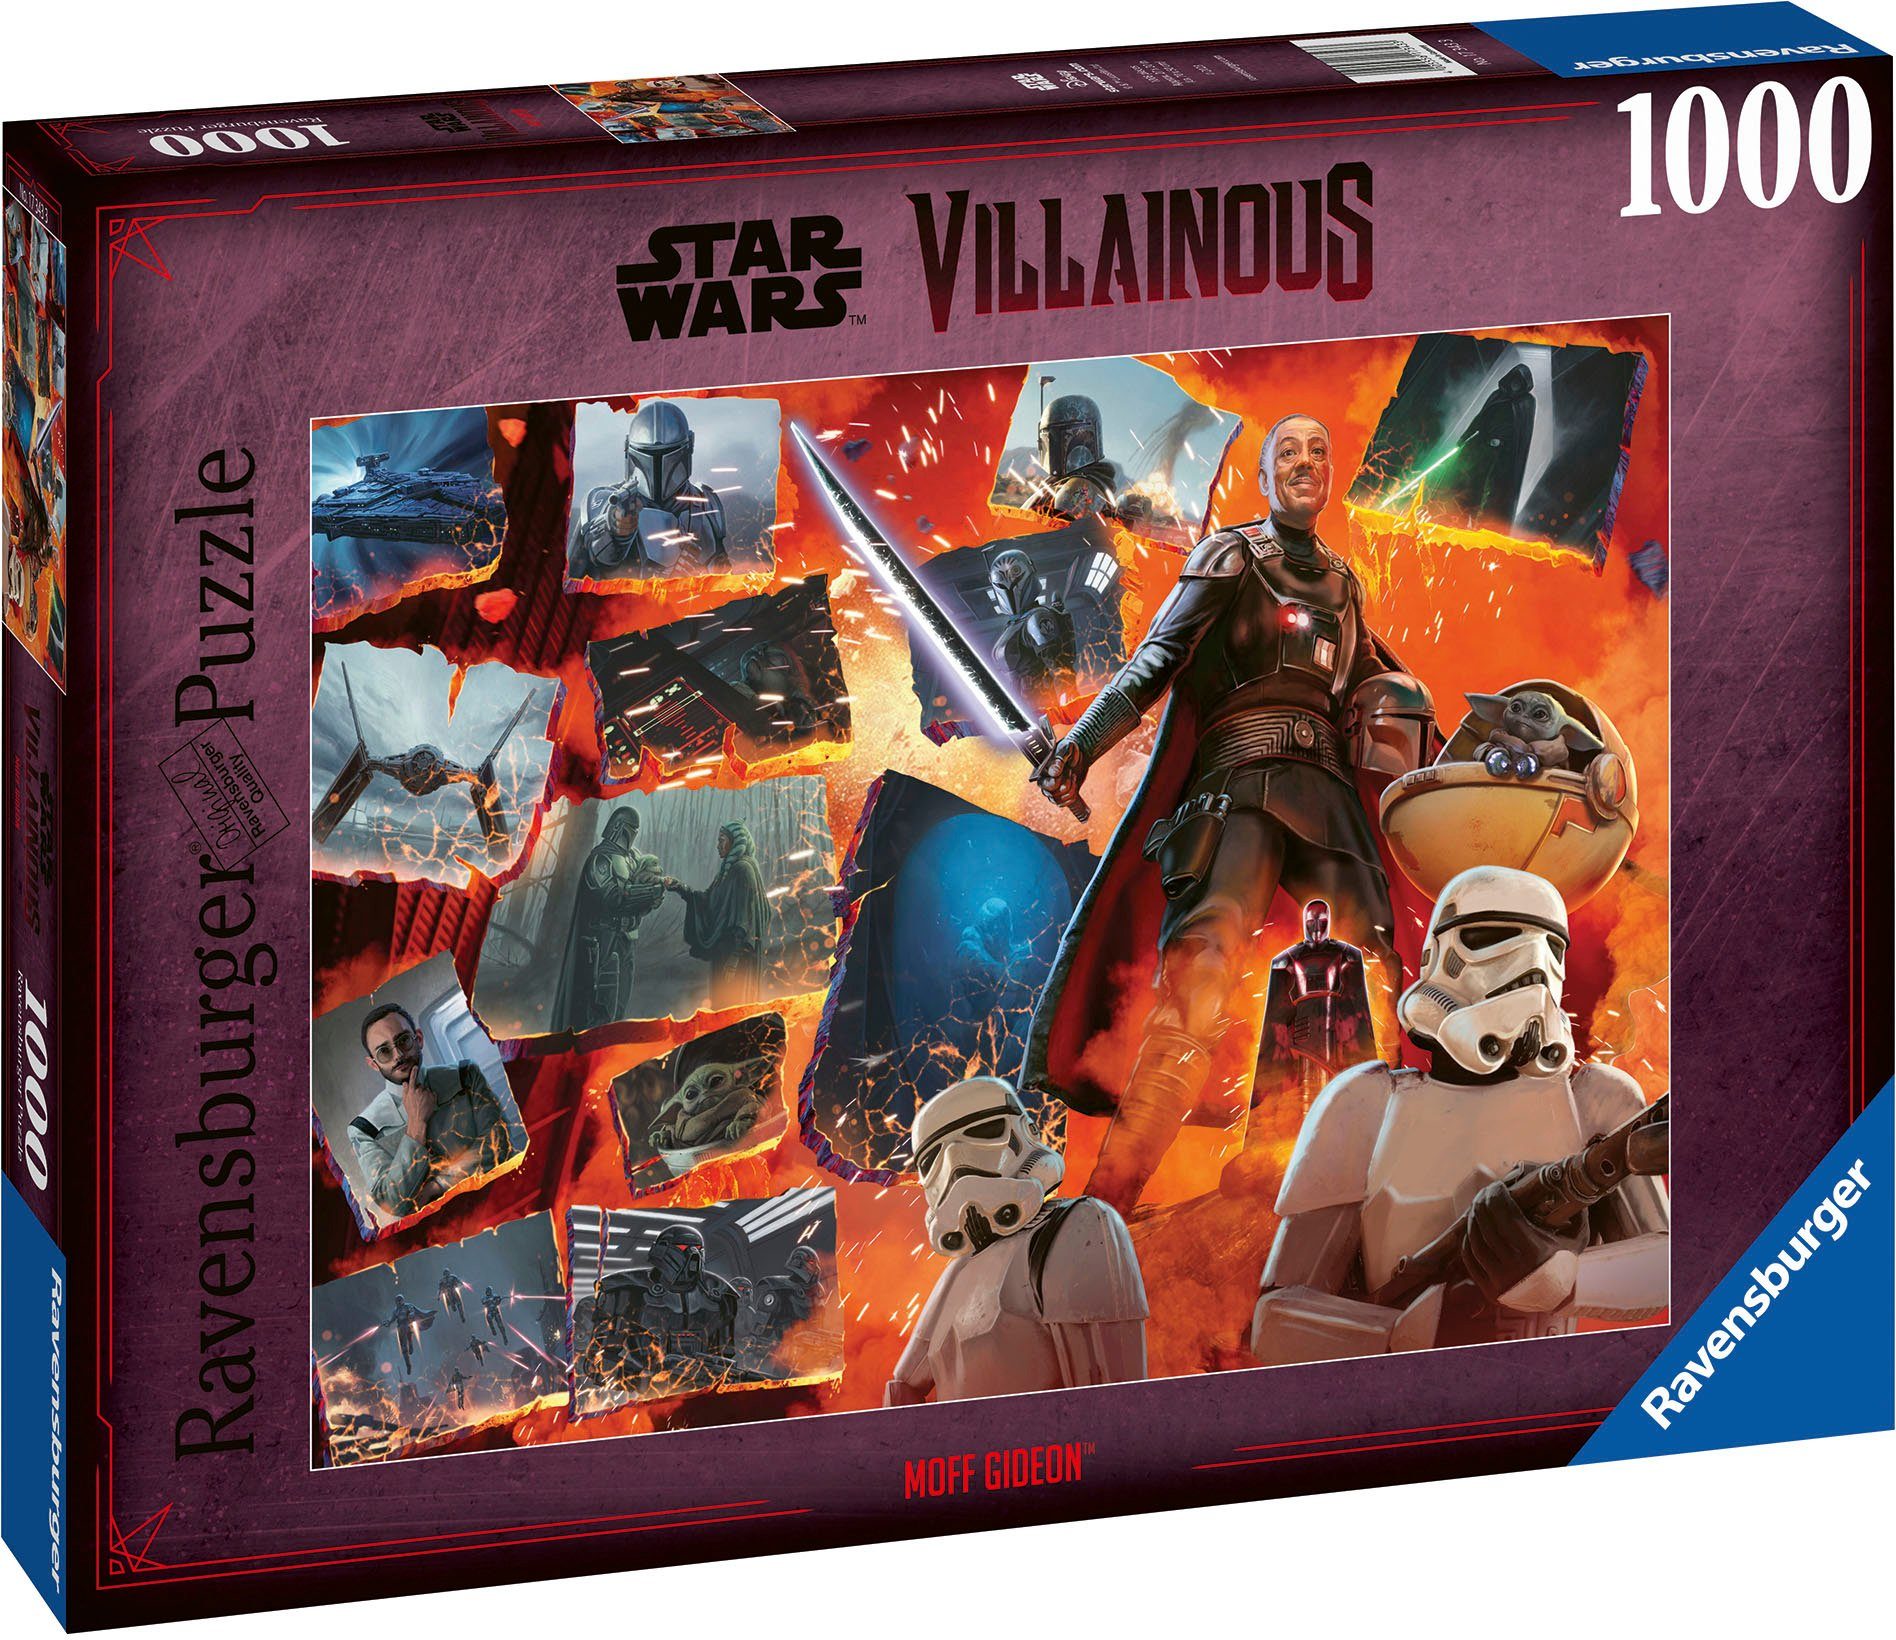 Ravensburger 1000 Puzzleteile, Moff Star Puzzle Made Germany Gideon, Villainous, in Wars